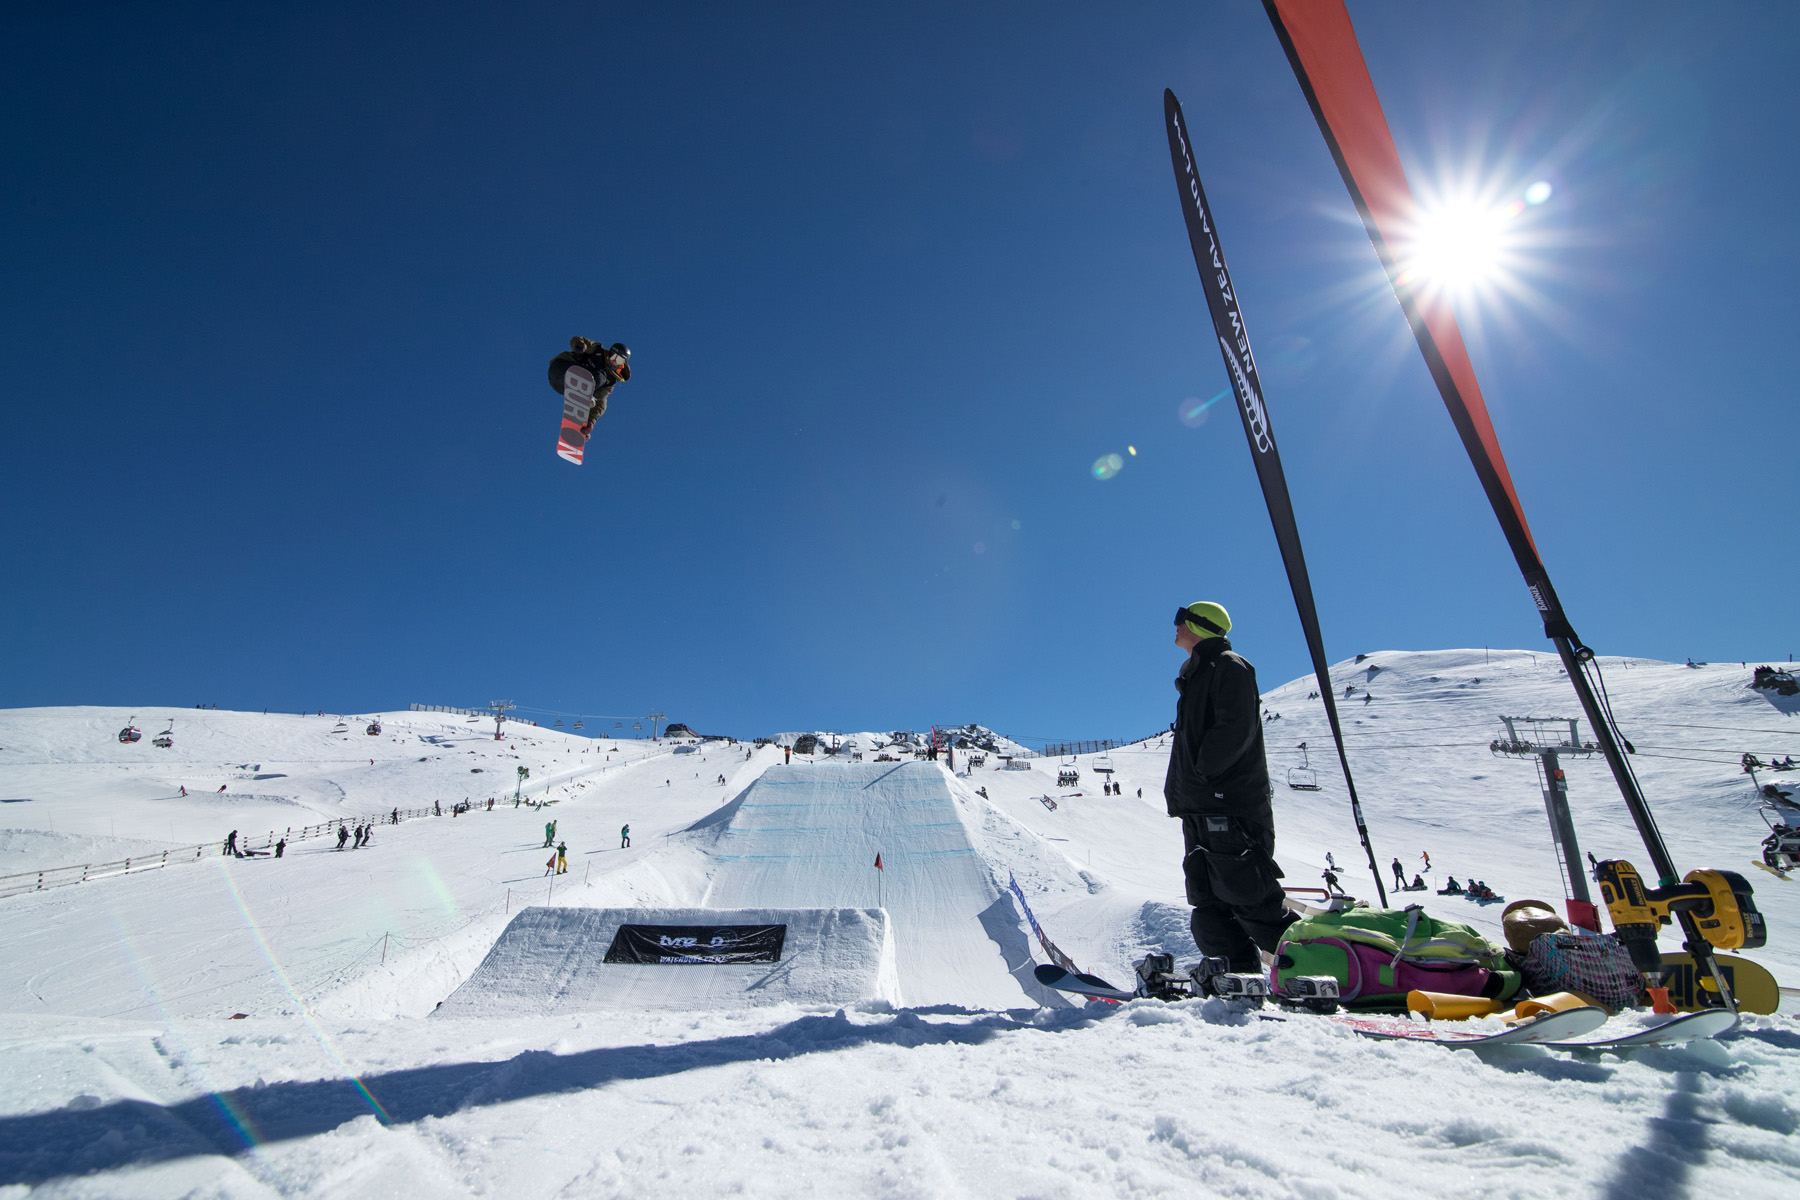 Monster Energy's Darcy Sharpe Took Second in Men's Slopestyle at the Winter Games in New Zealand